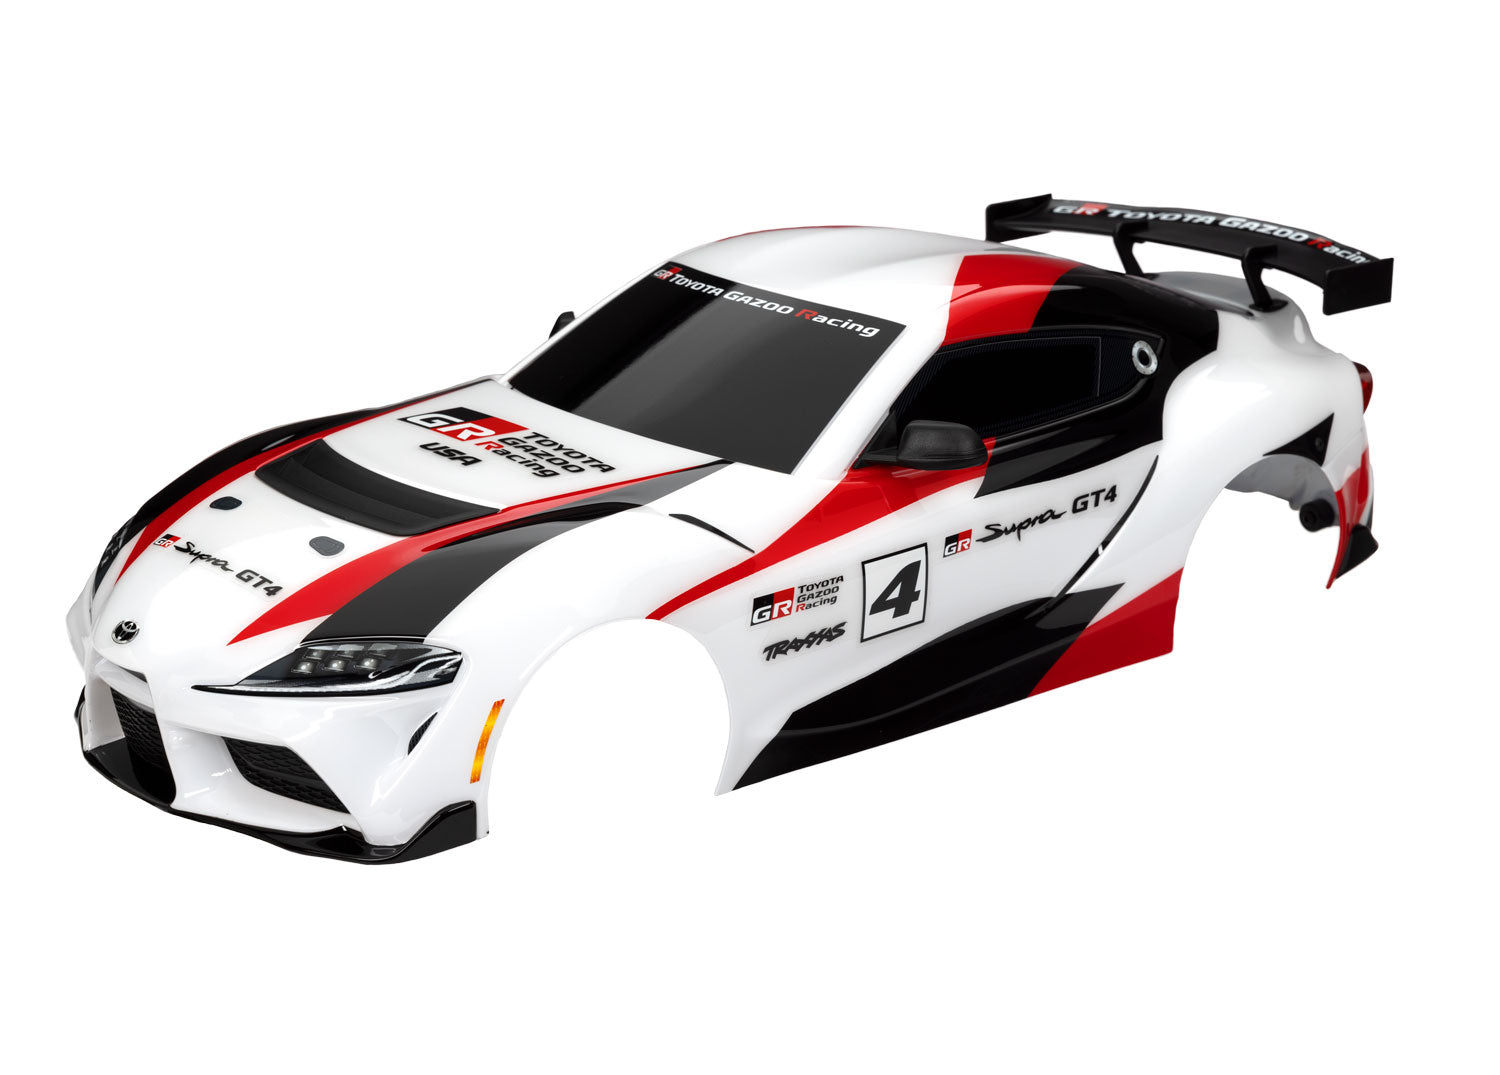 TRAXXAS 9340X Body, Toyota Supra GT4, complete (white) (painted, decals applied) (includes side mirrors, wing, grilles, vents, & clipless mounting)